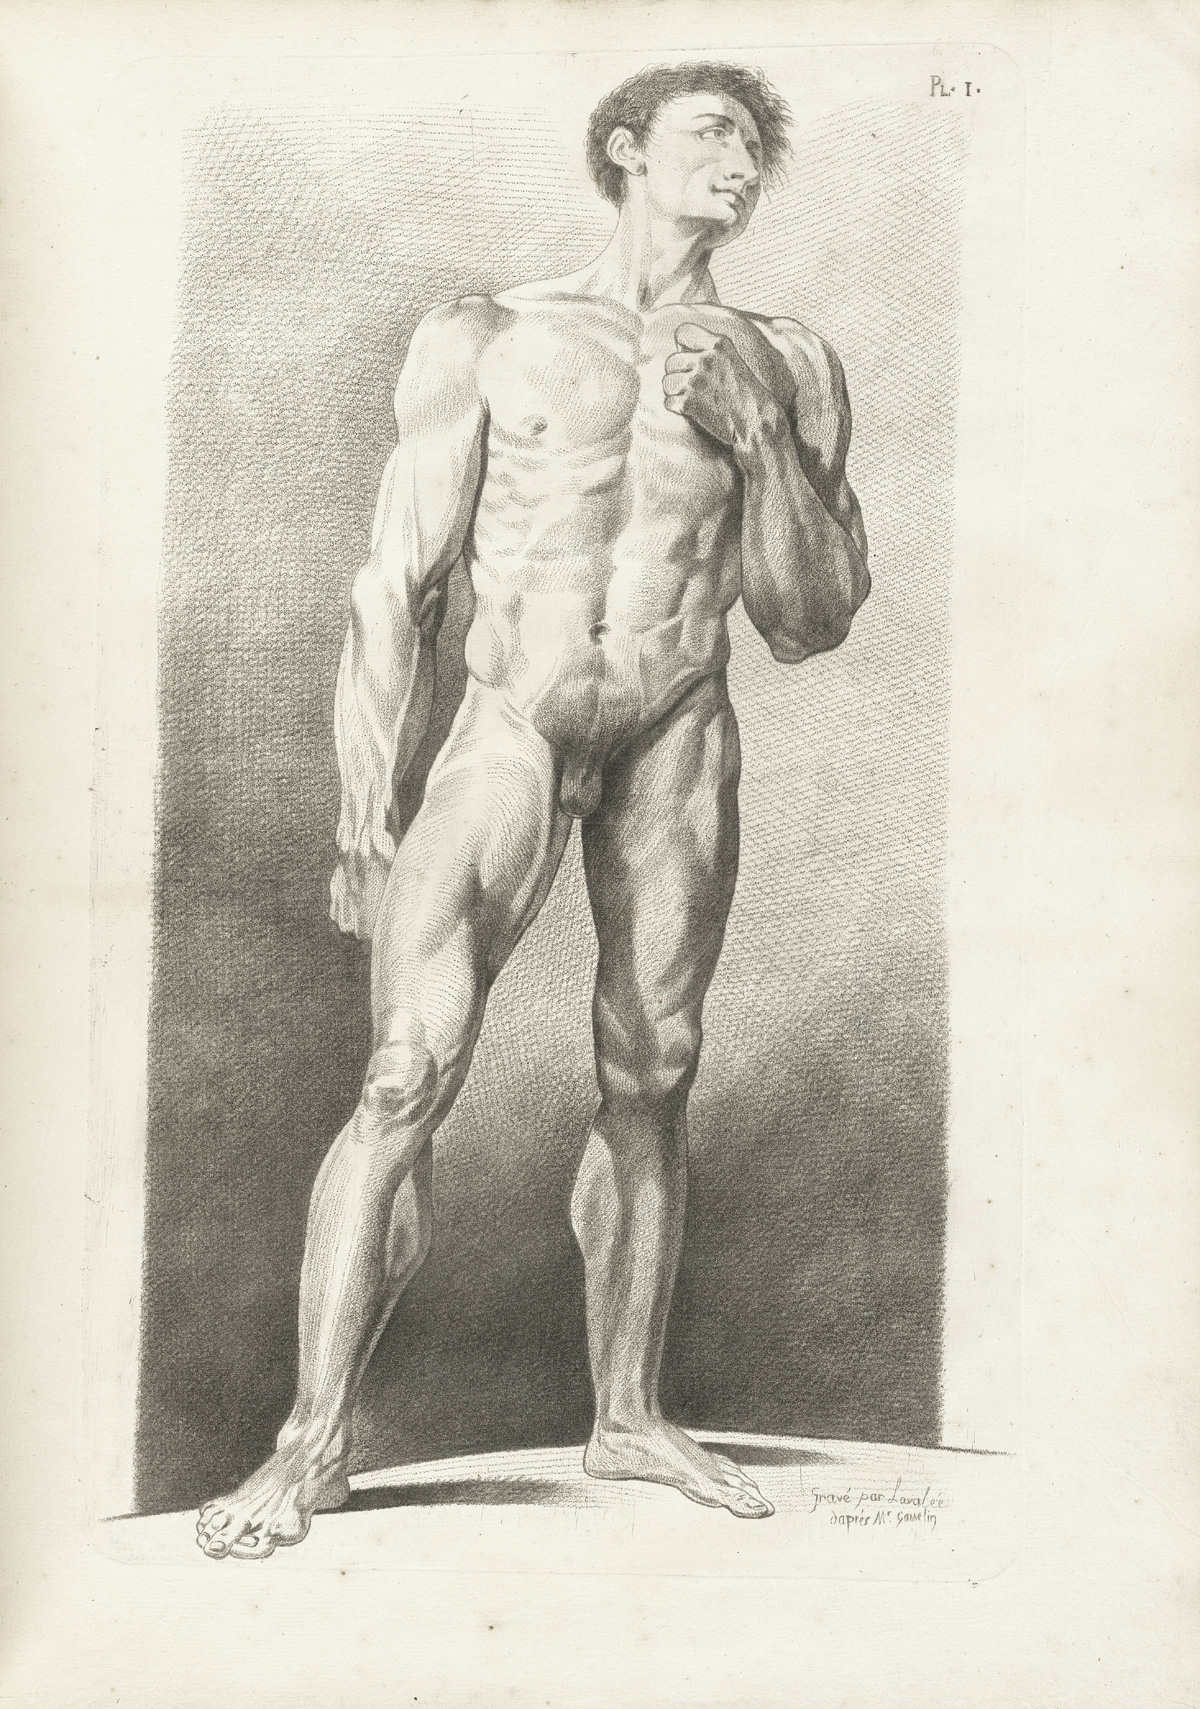 Engraving of a facing, standing male nude figure with detail of the musculature of the chest, torso, arms and legs; his left arm is bent up at the elbow with his hand on his left pectoral muscle, and he looks off slightly to the right of the page; from Jacques Gamelin’s Nouveau recueil d’osteologie et de myologie, NLM Call no.: WZ 260 G178m 1779.